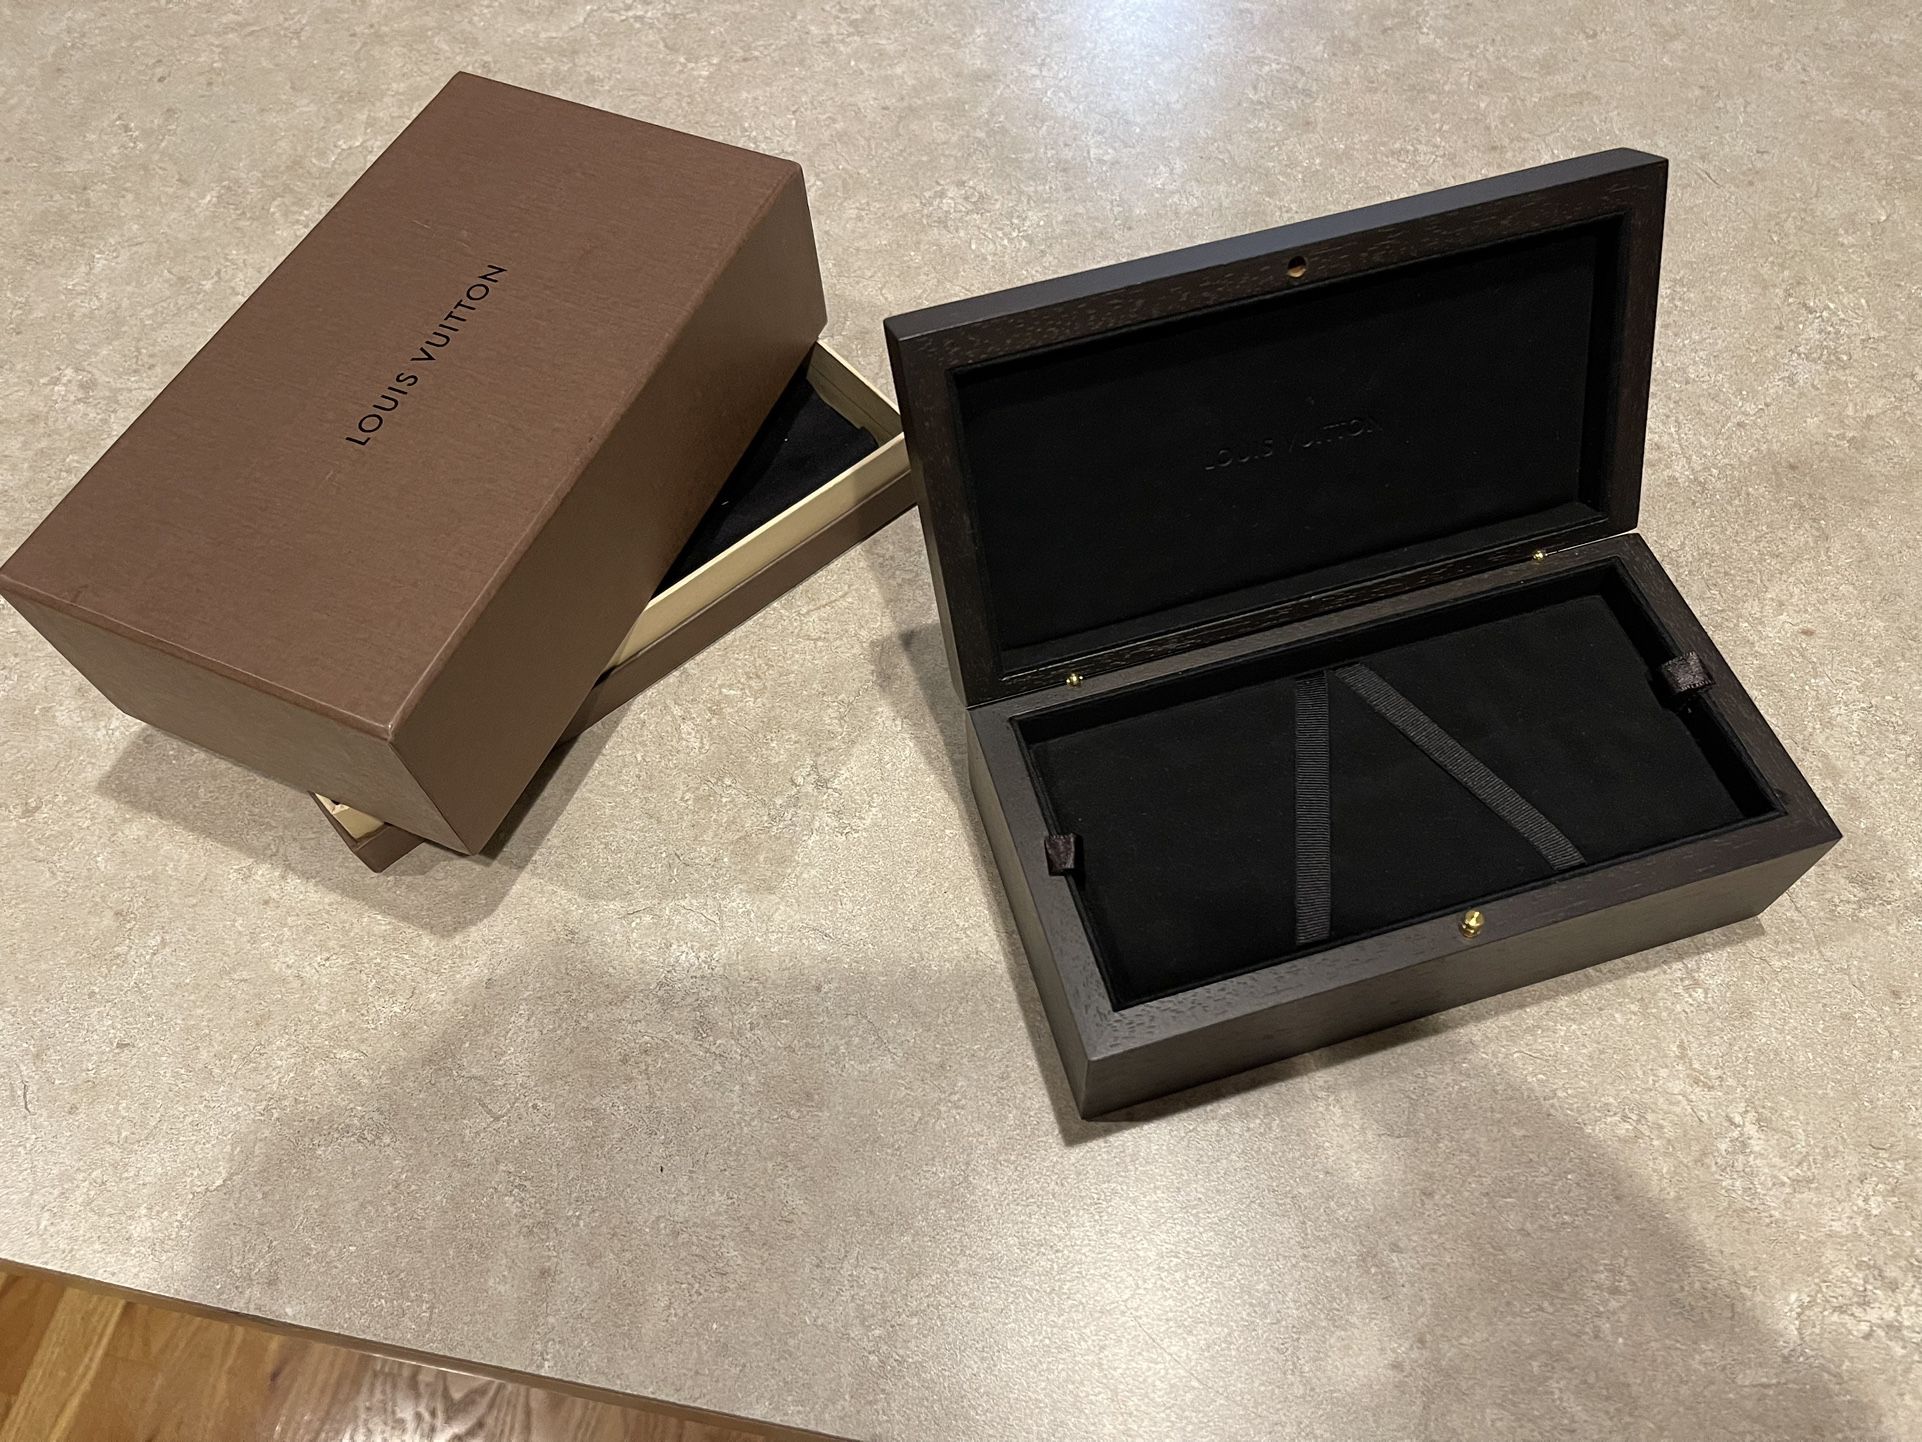 Louis Vuitton Jewelry Box for Sale in Denver, CO - OfferUp